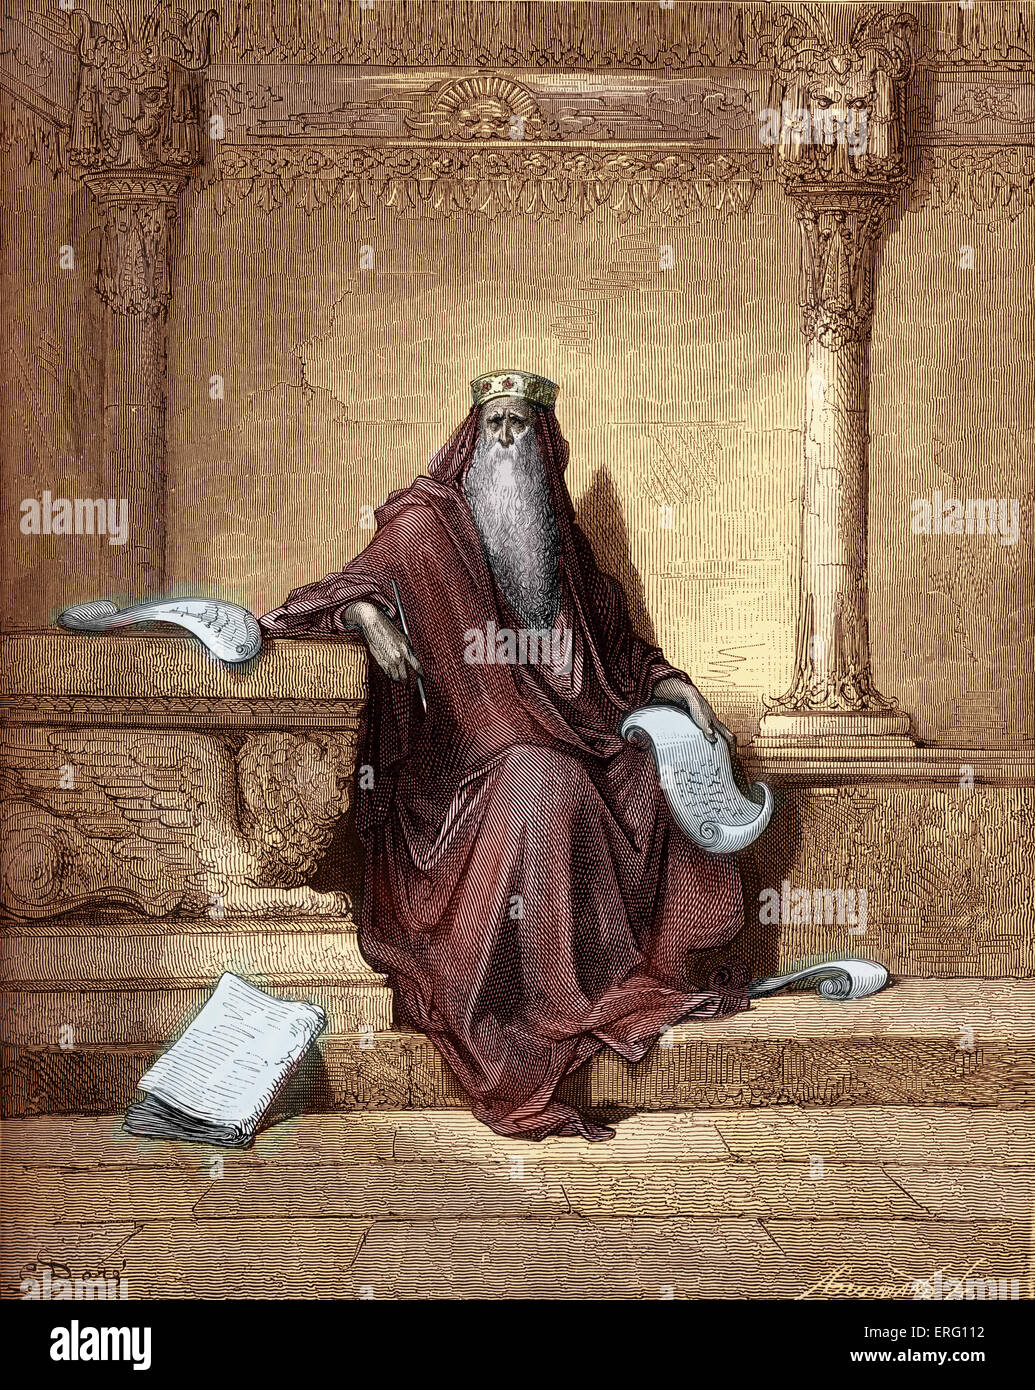 King Solomon. Writing Proverbs. Engraving by Gustave Doré (1832 - 1883 ...